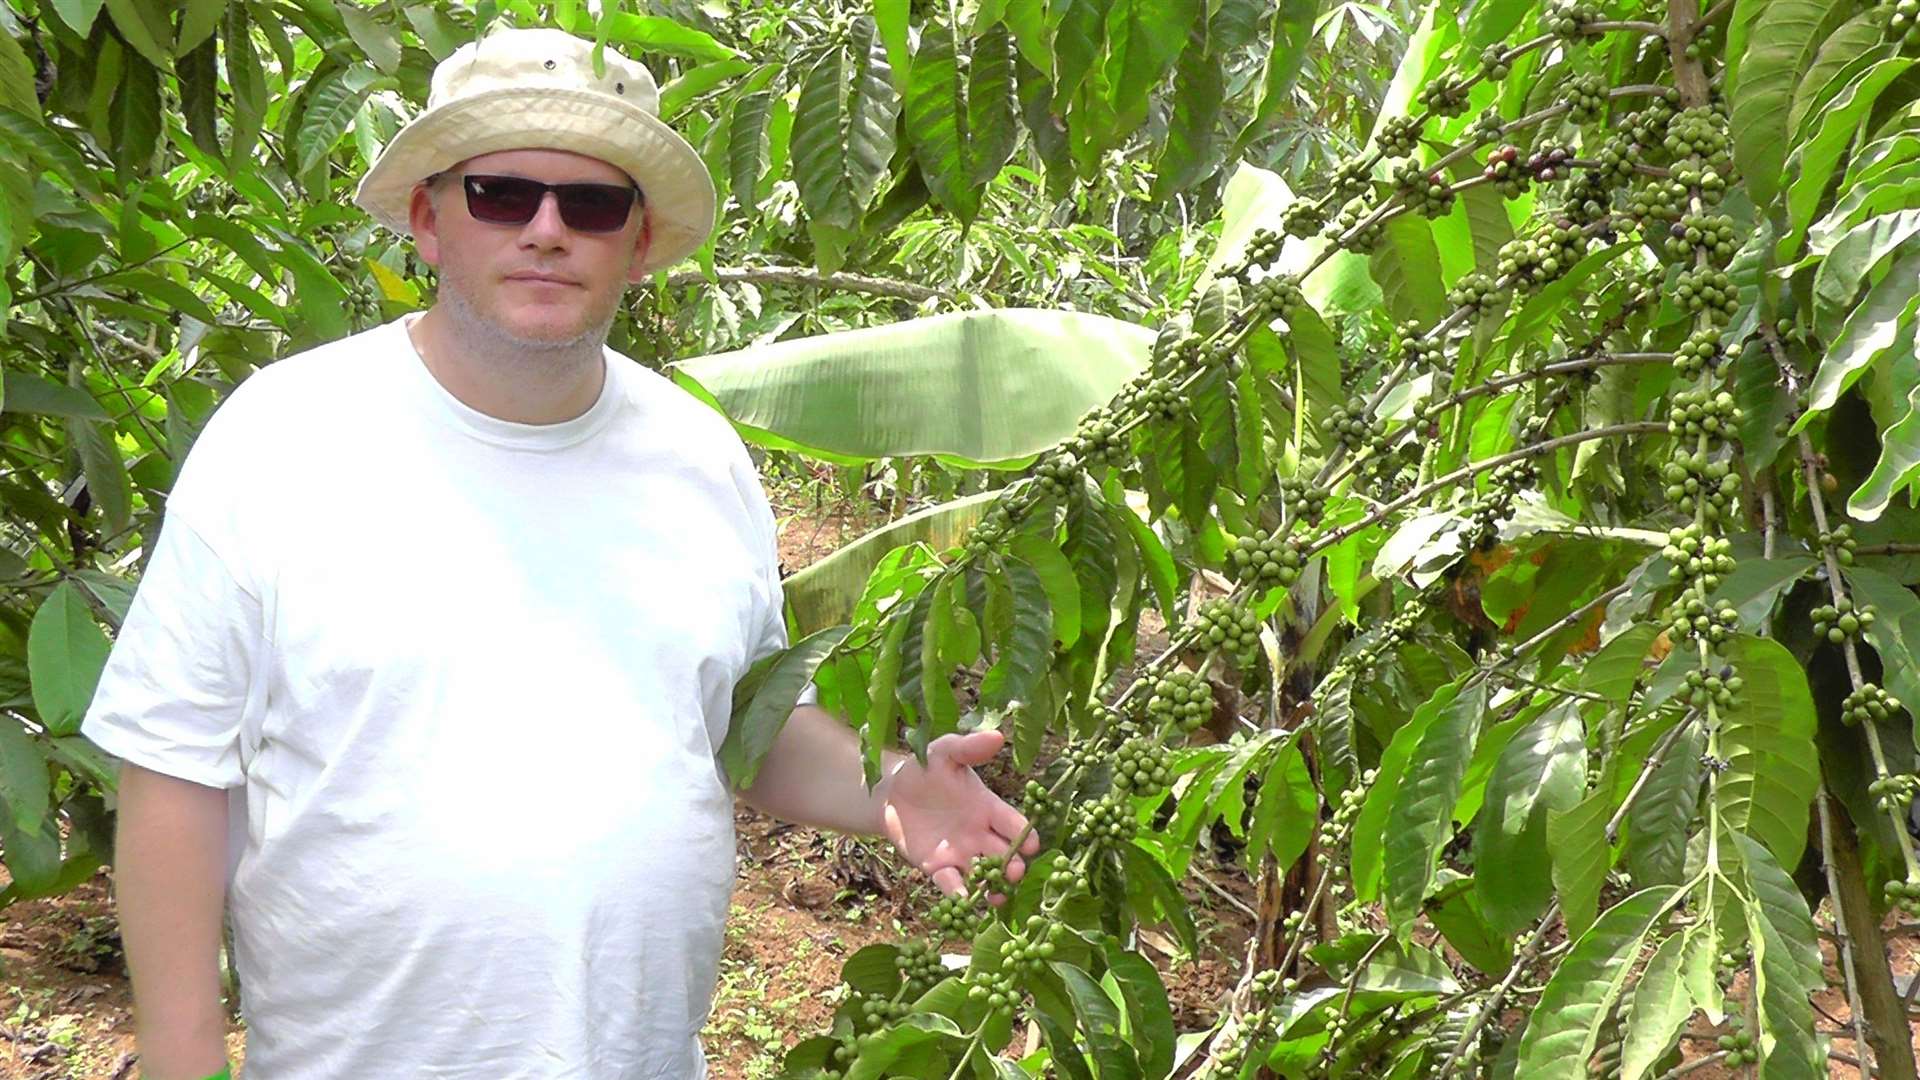 HatHats founder Louis Hurst at the coffee bean plantation in Uganda